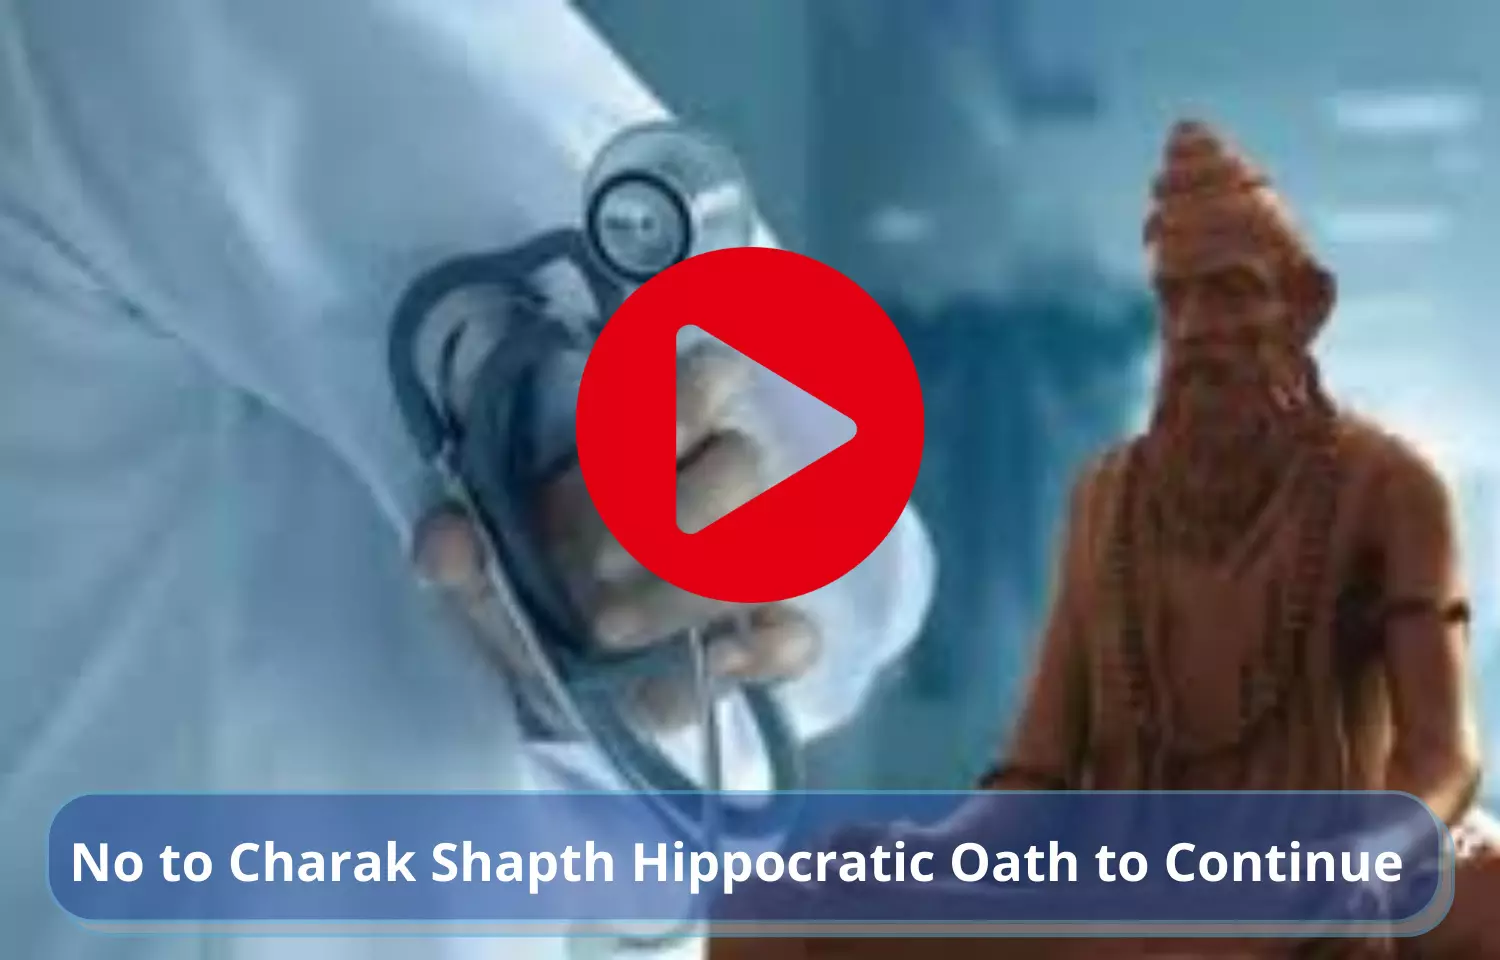 No to Charak Shapth Hippocratic Oath to Continue